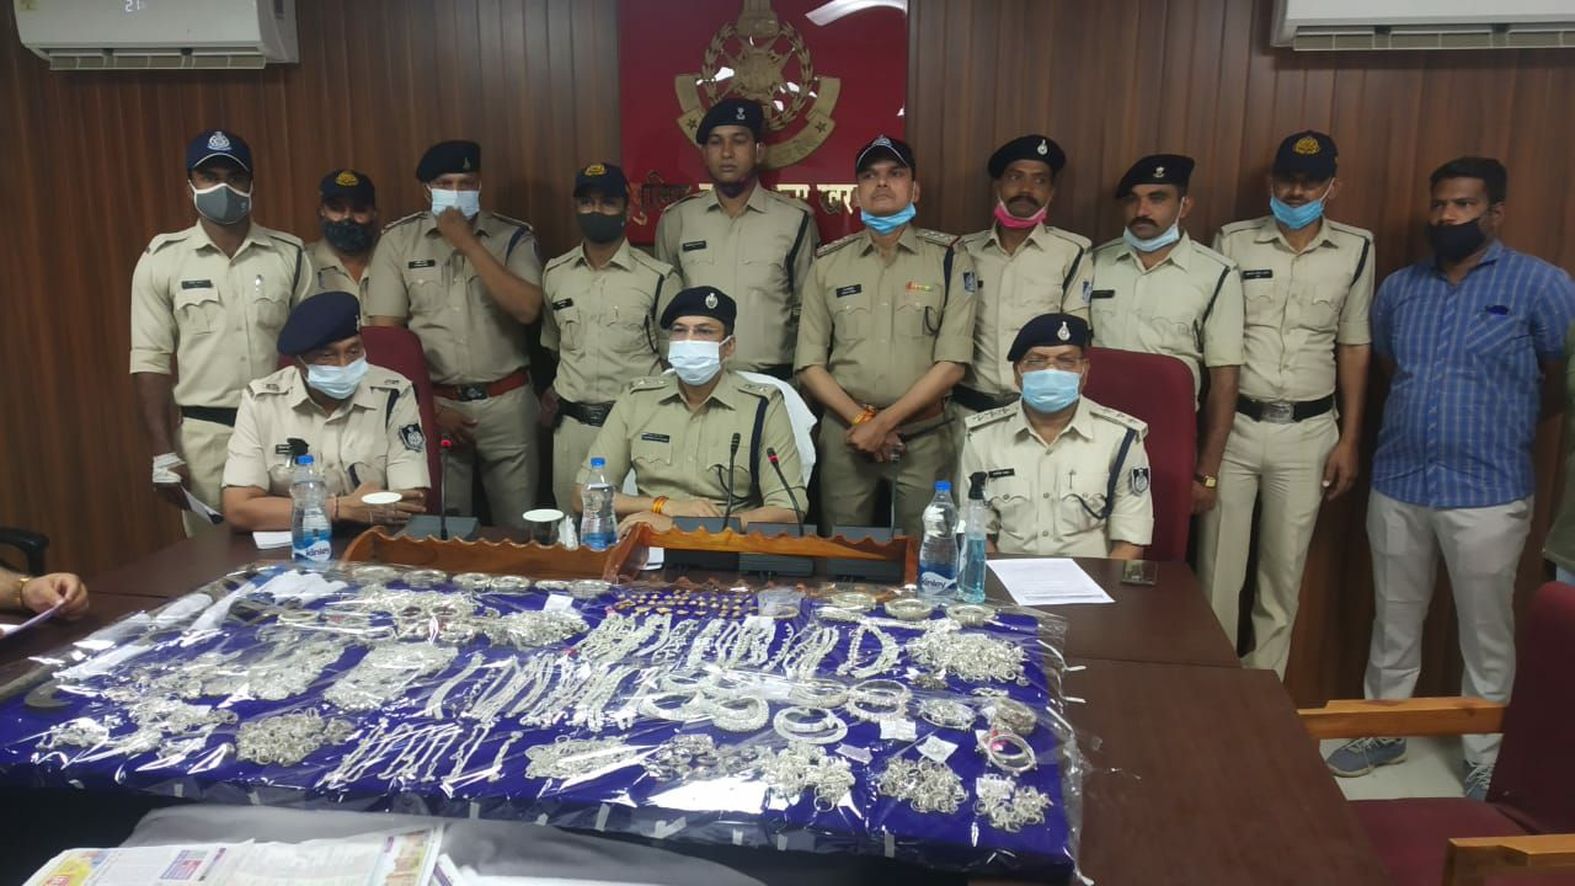 Interrogation gang robbed by police, 15 lakh silver and gold recovered